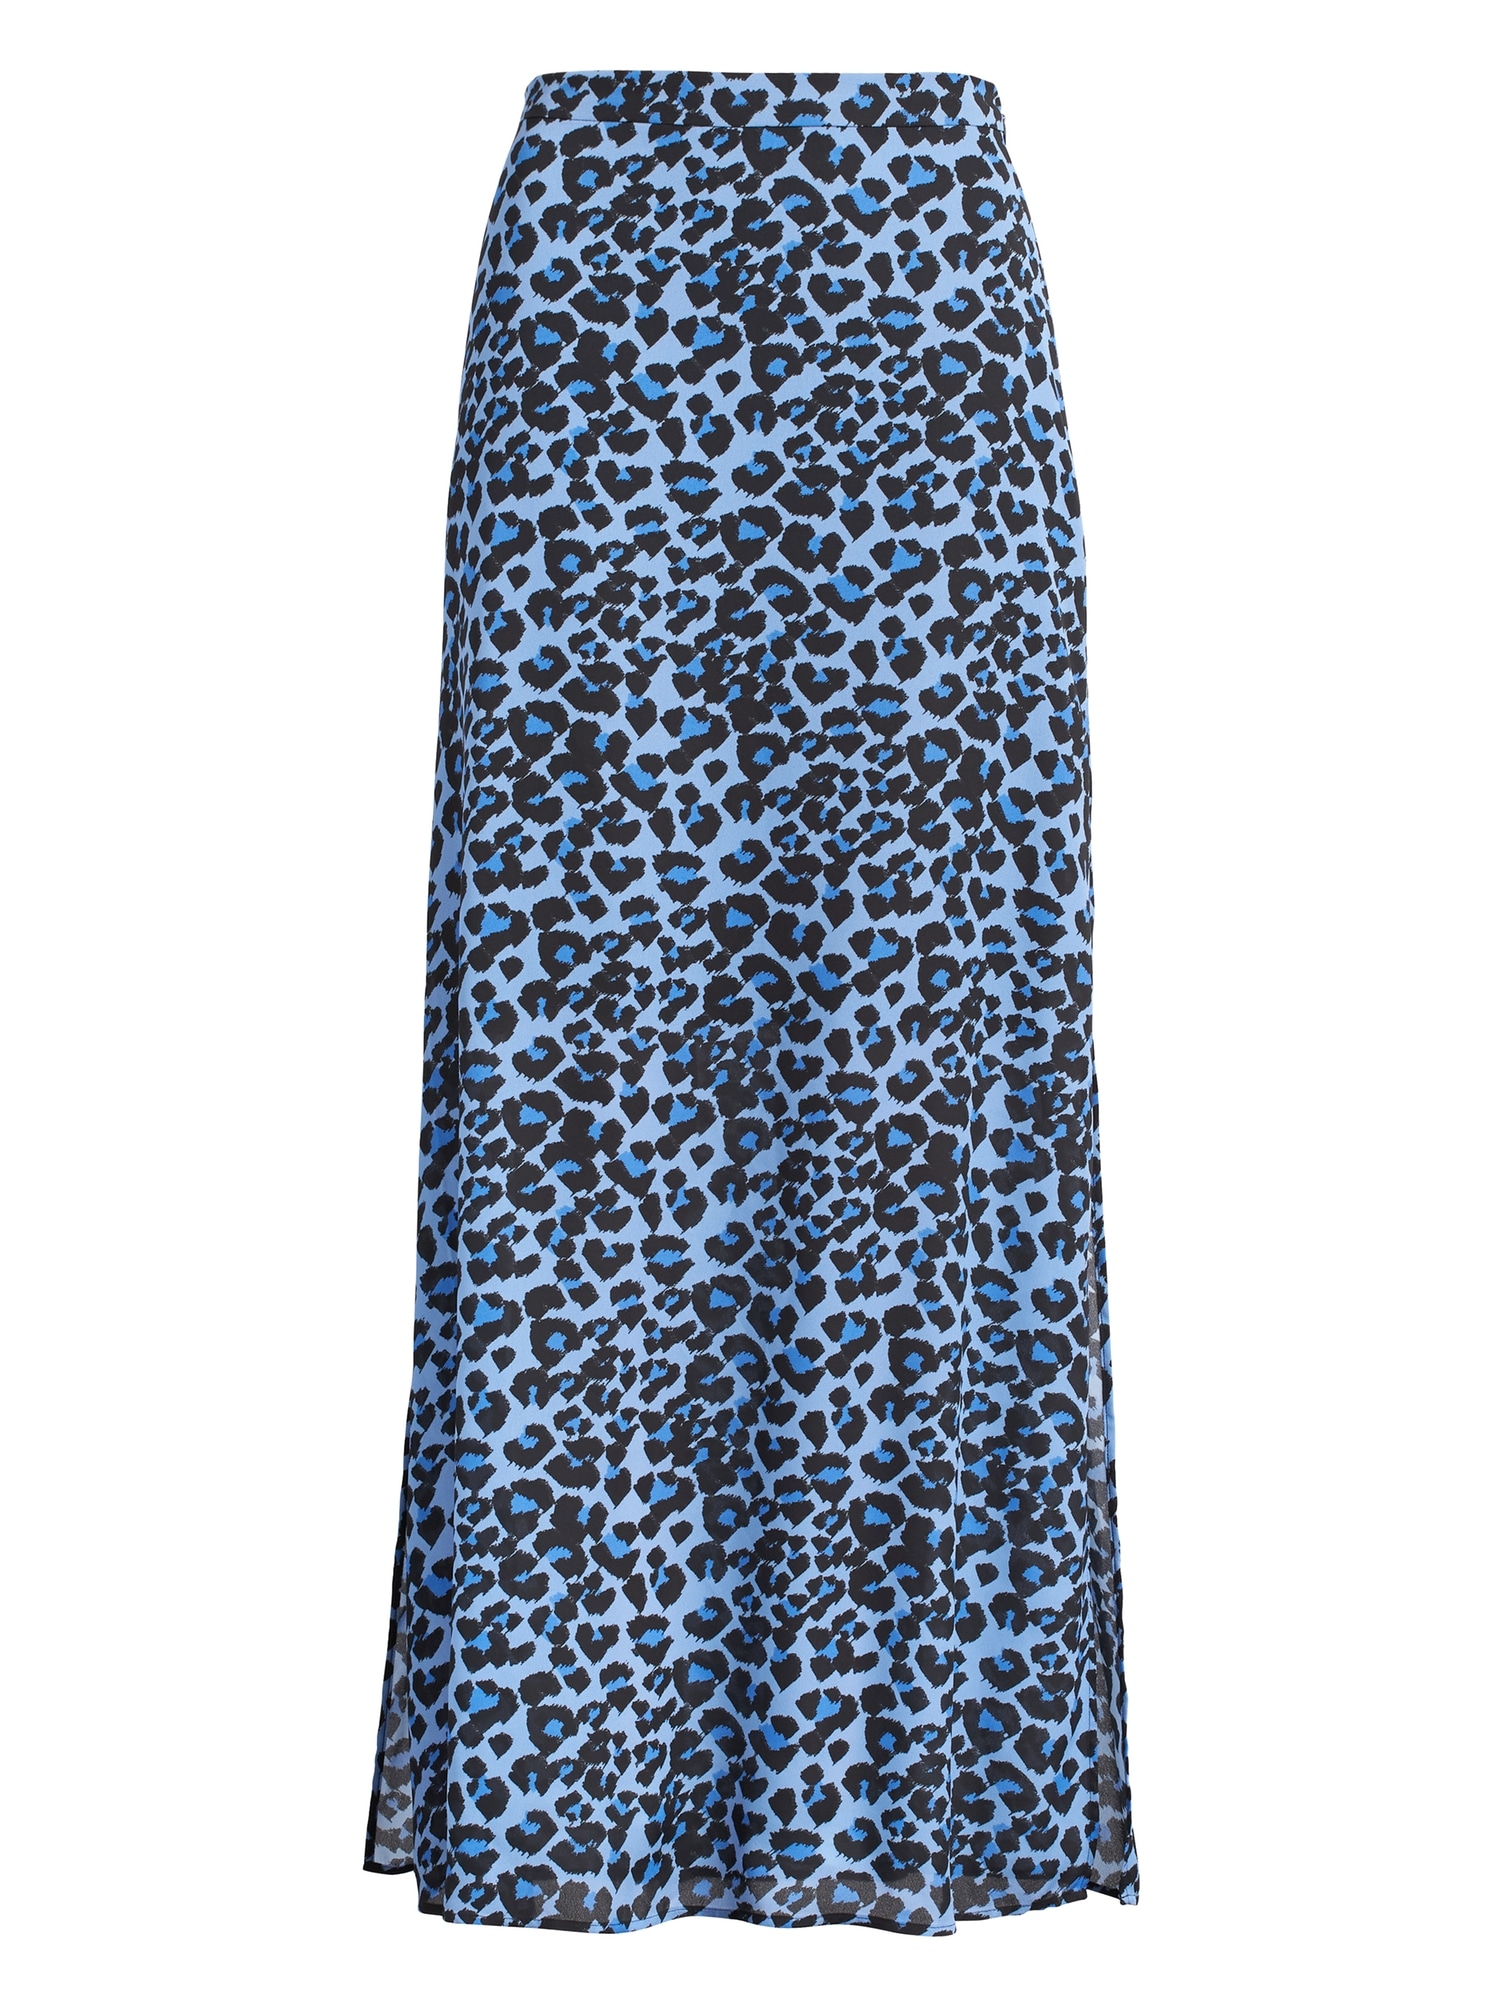 Leopard Maxi Skirt with Side Slits